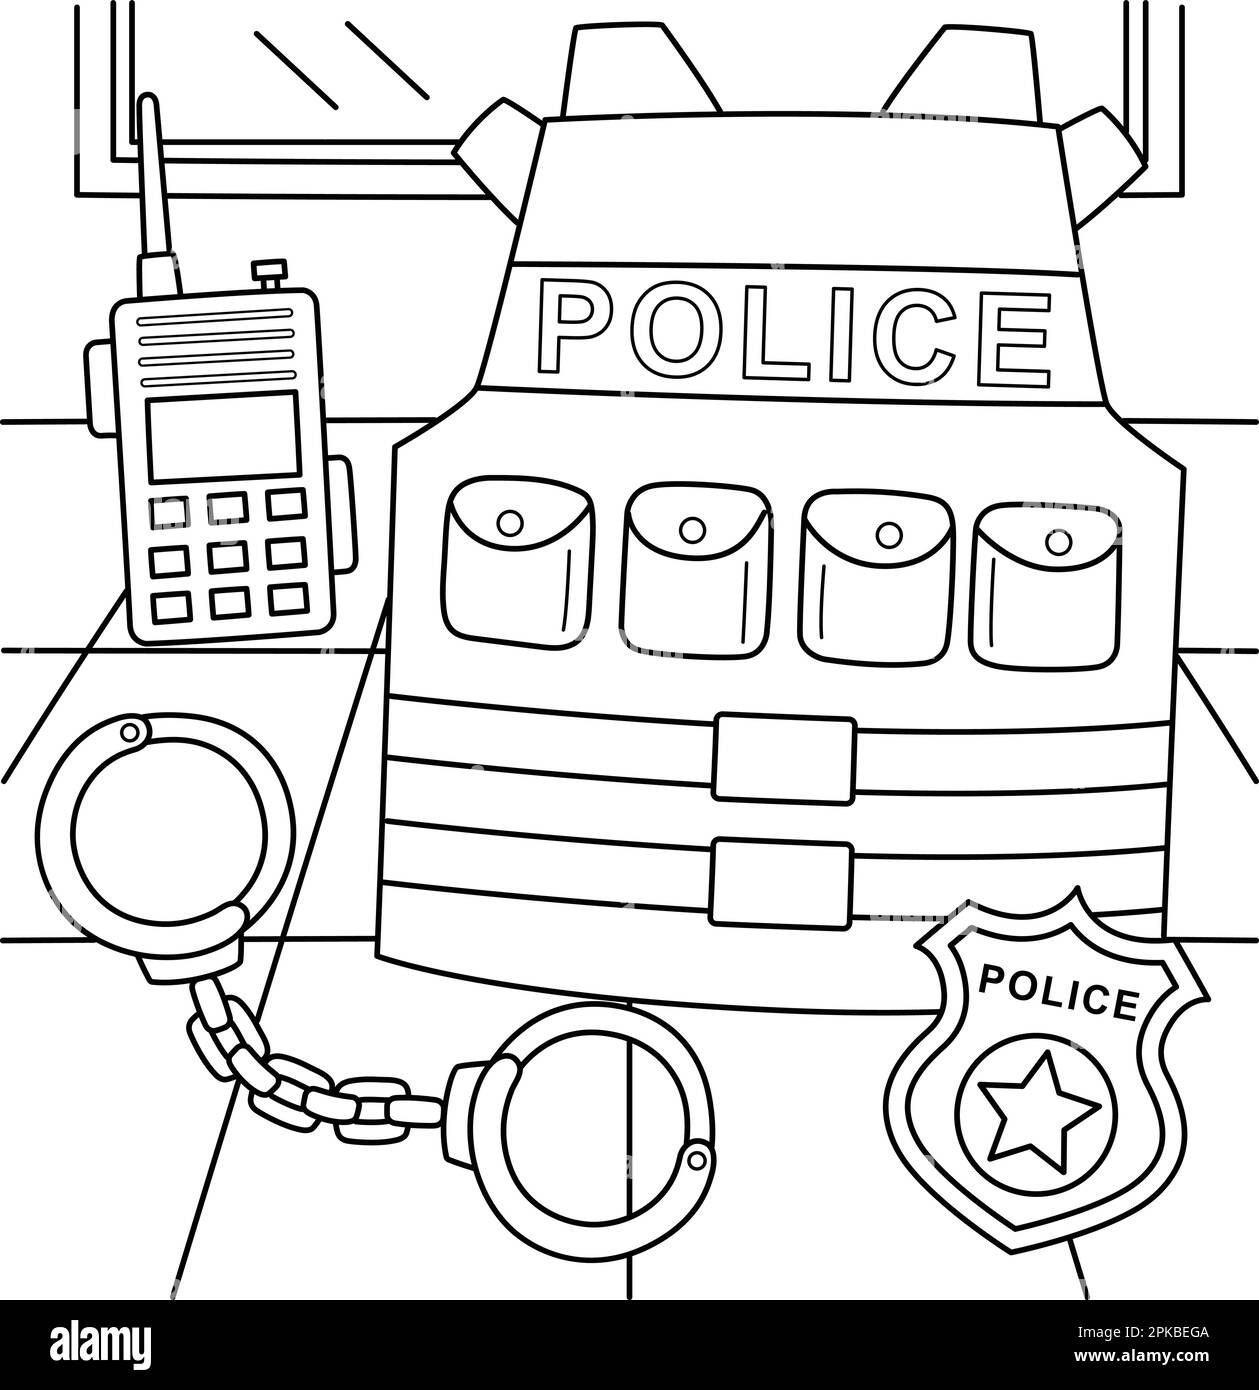 Police Officer Equipment Coloring Page for Kids Stock Vector Image ...